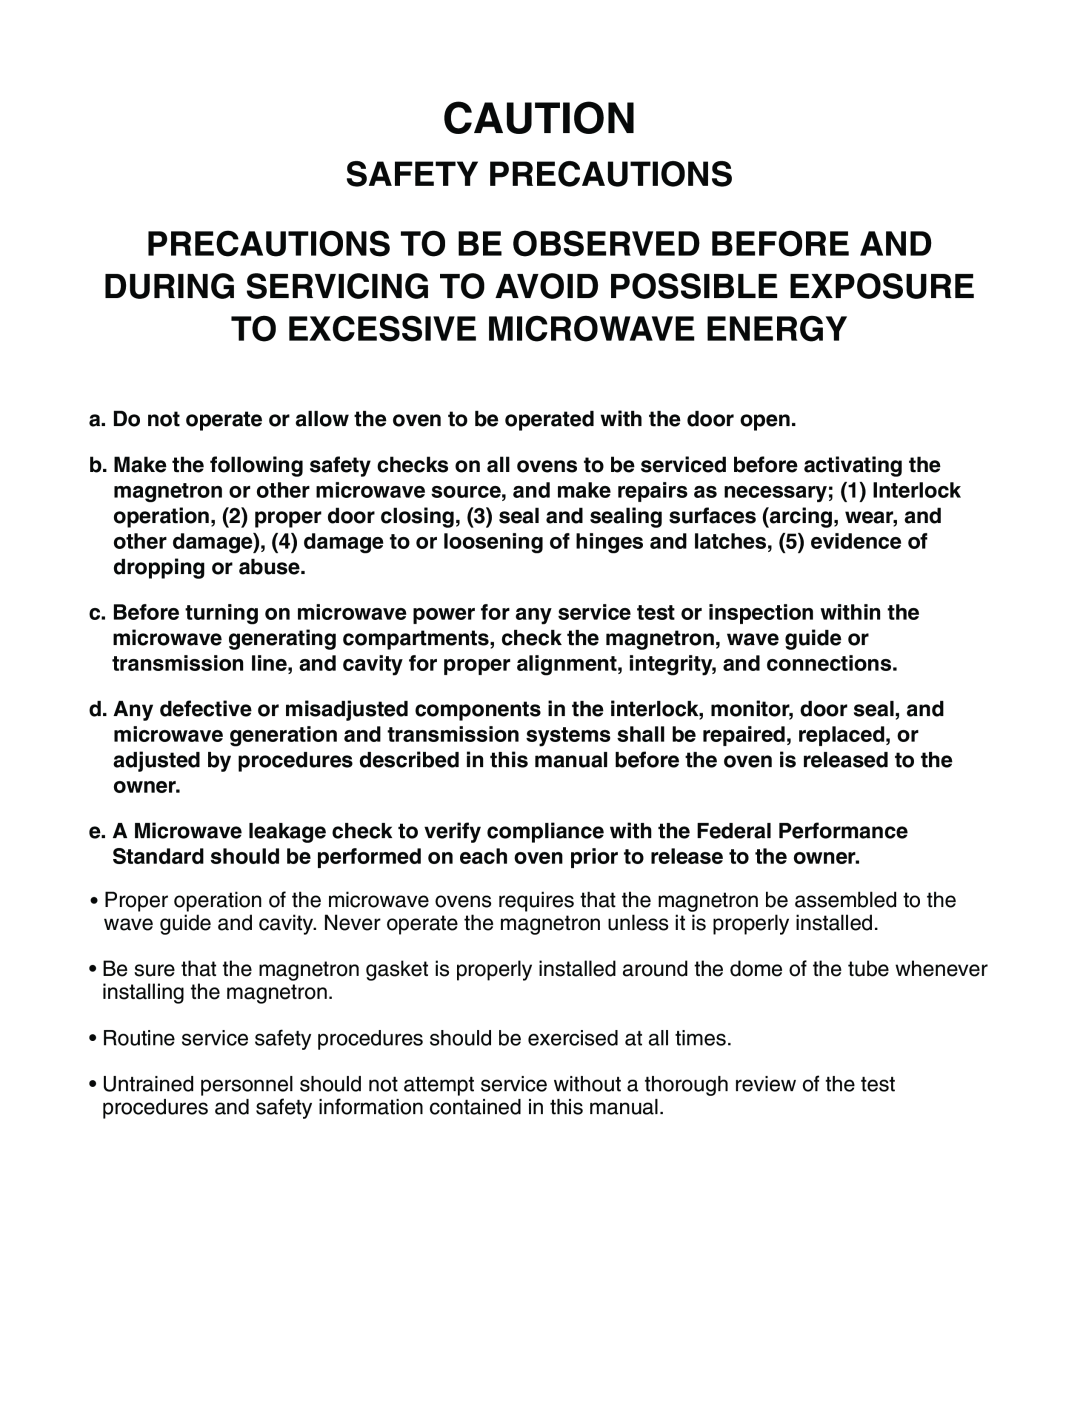 LG Electronics LMV1625B, LMV1625W Safety Precautions Precautions To Be Observed Before And, To Excessive Microwave Energy 